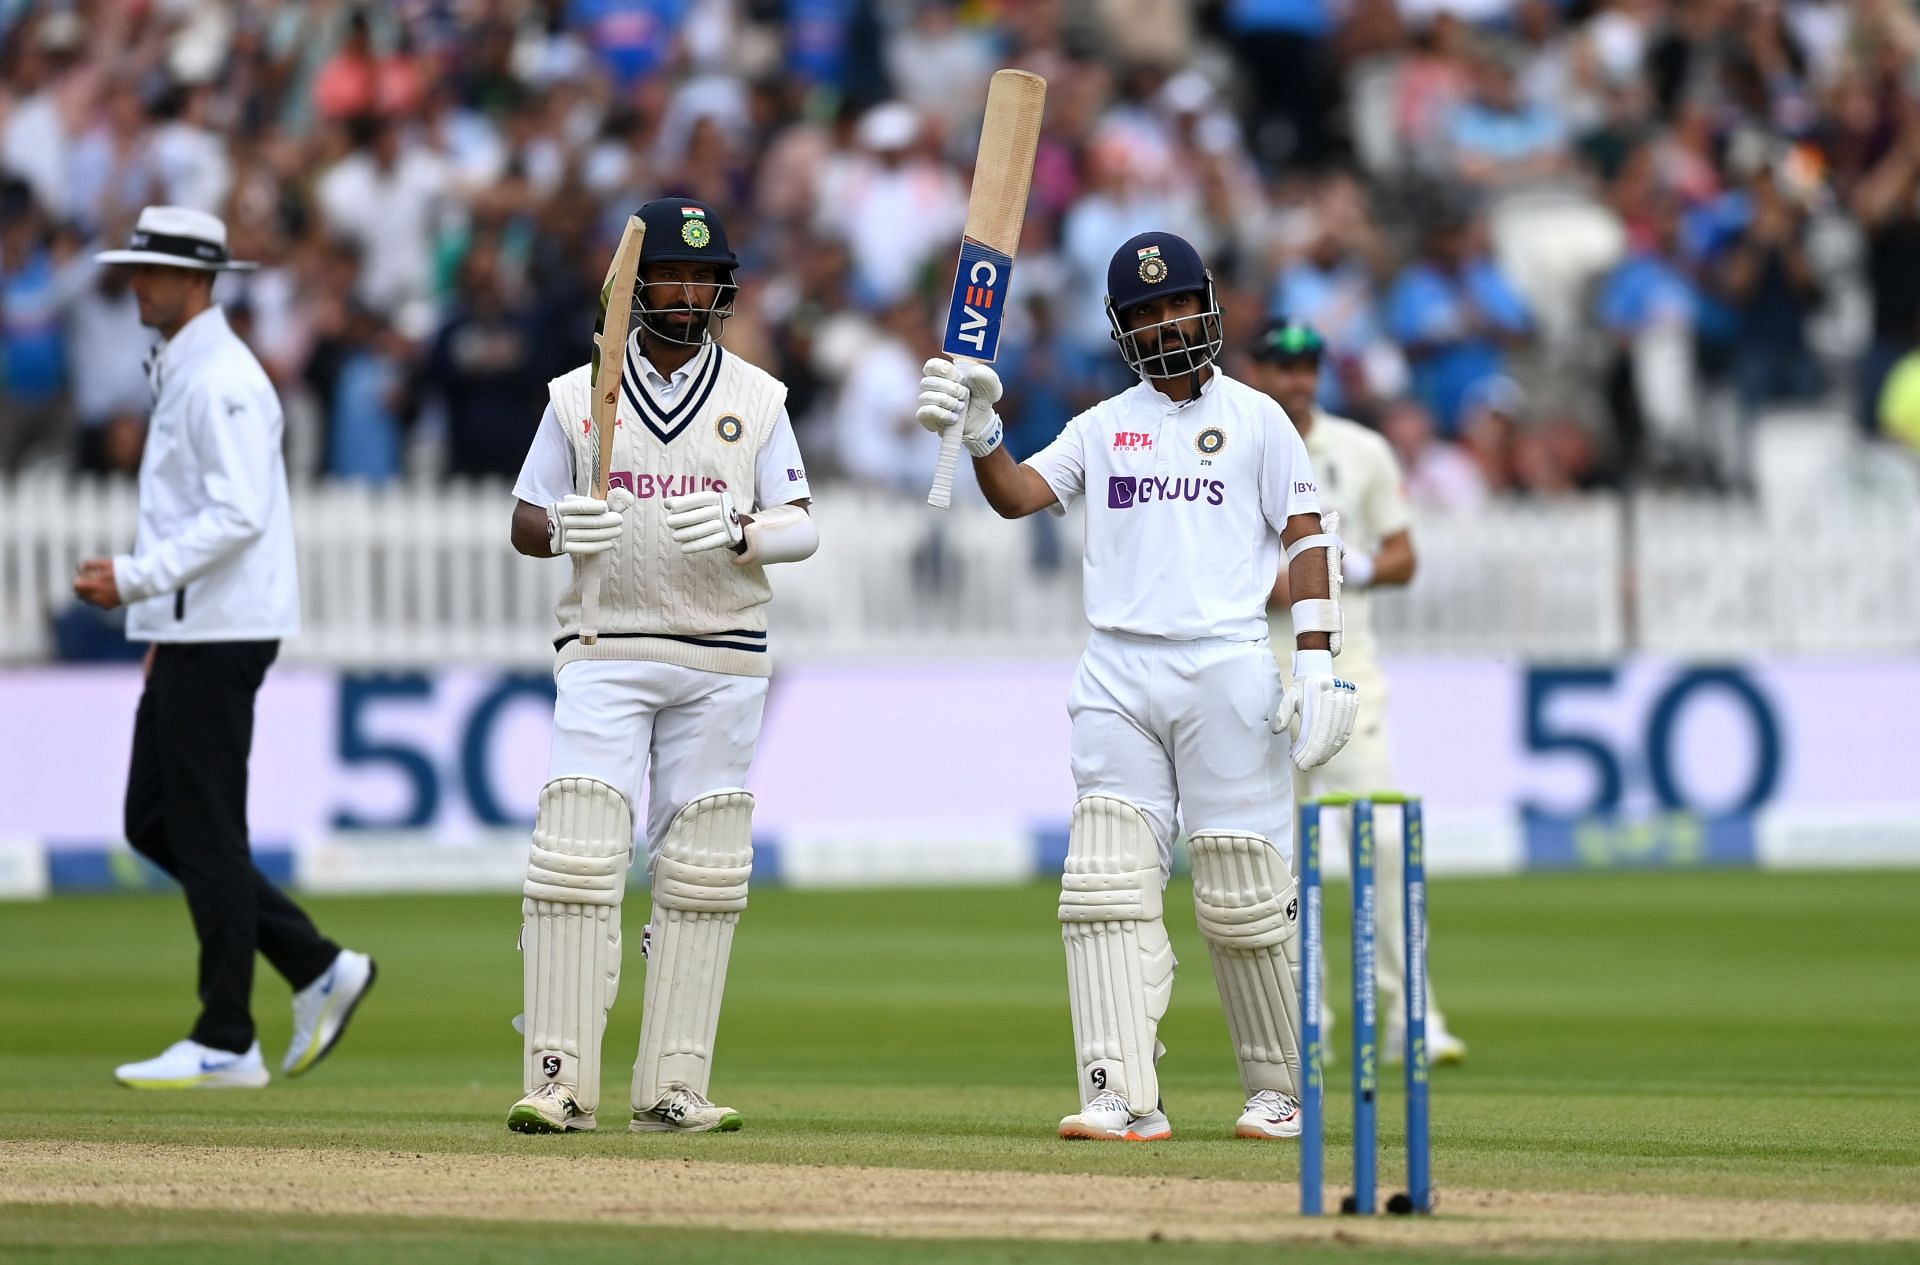 Pujara (L) and Rahane (R) struck twin fifties to help India set a target of 240